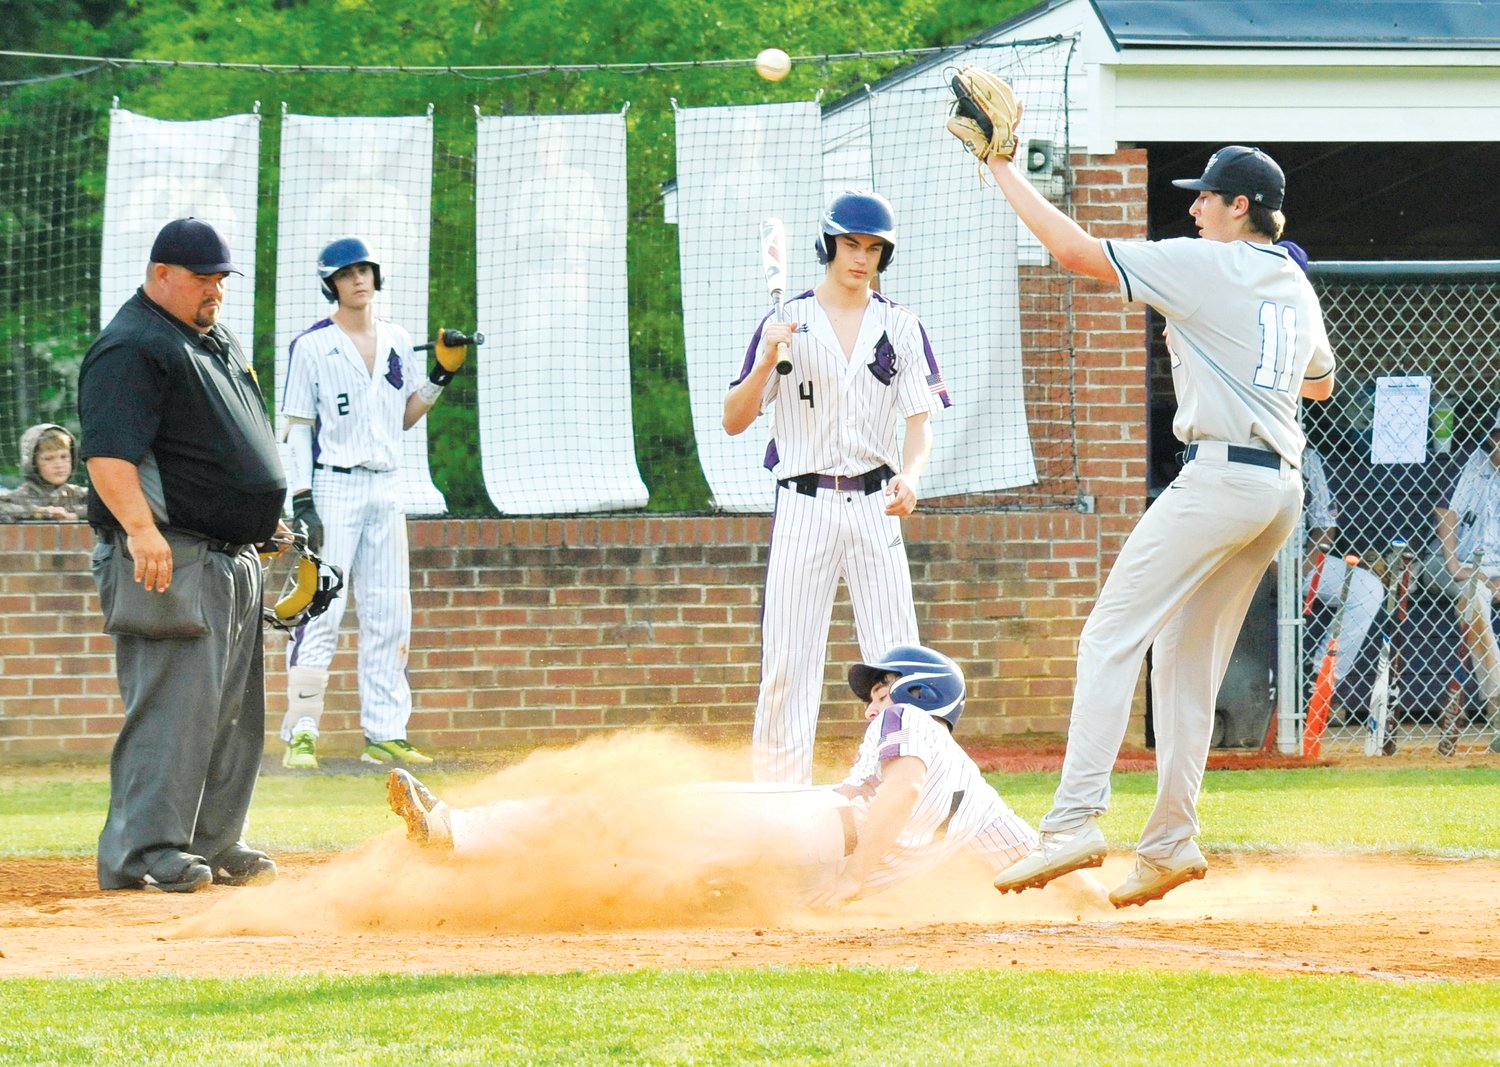 Chatham Charter sophomore Lucas Smith (1) slides into home plate to account for 1 of the 16 runs scored by the Knights in the 15-run thrashing of the Ascend Leadership Aviators on April 26.